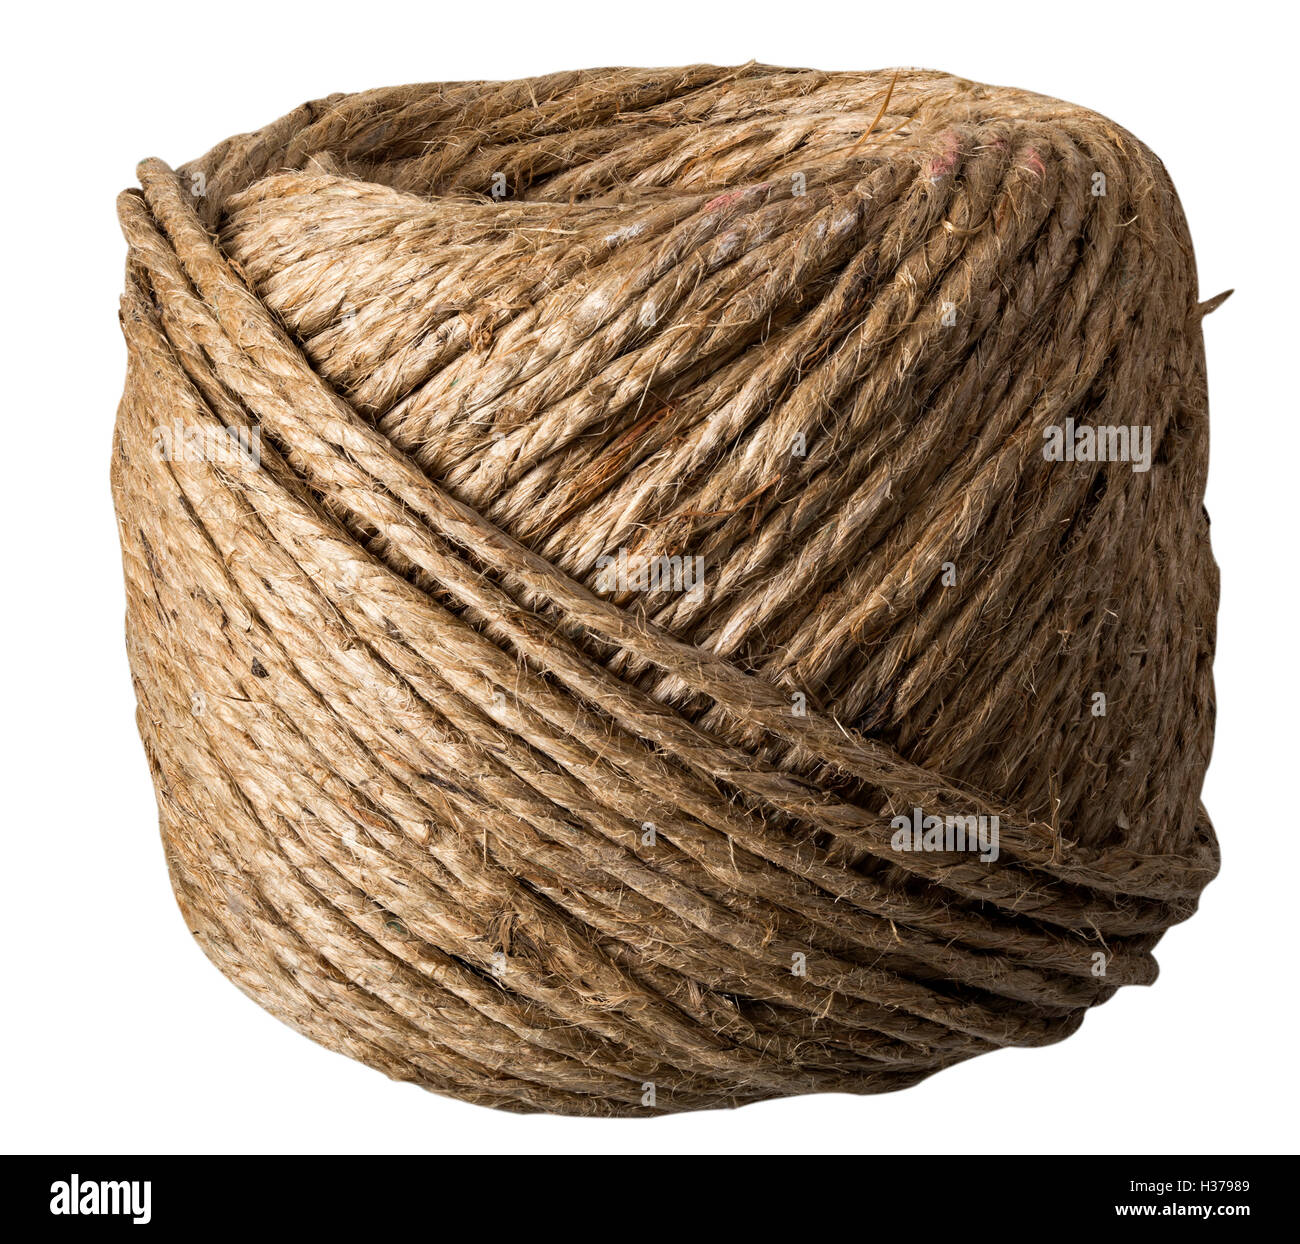 Ball of hemp rope isolated on white background. The image is a cut out with a clipping path and is in full focus, front to back. Stock Photo